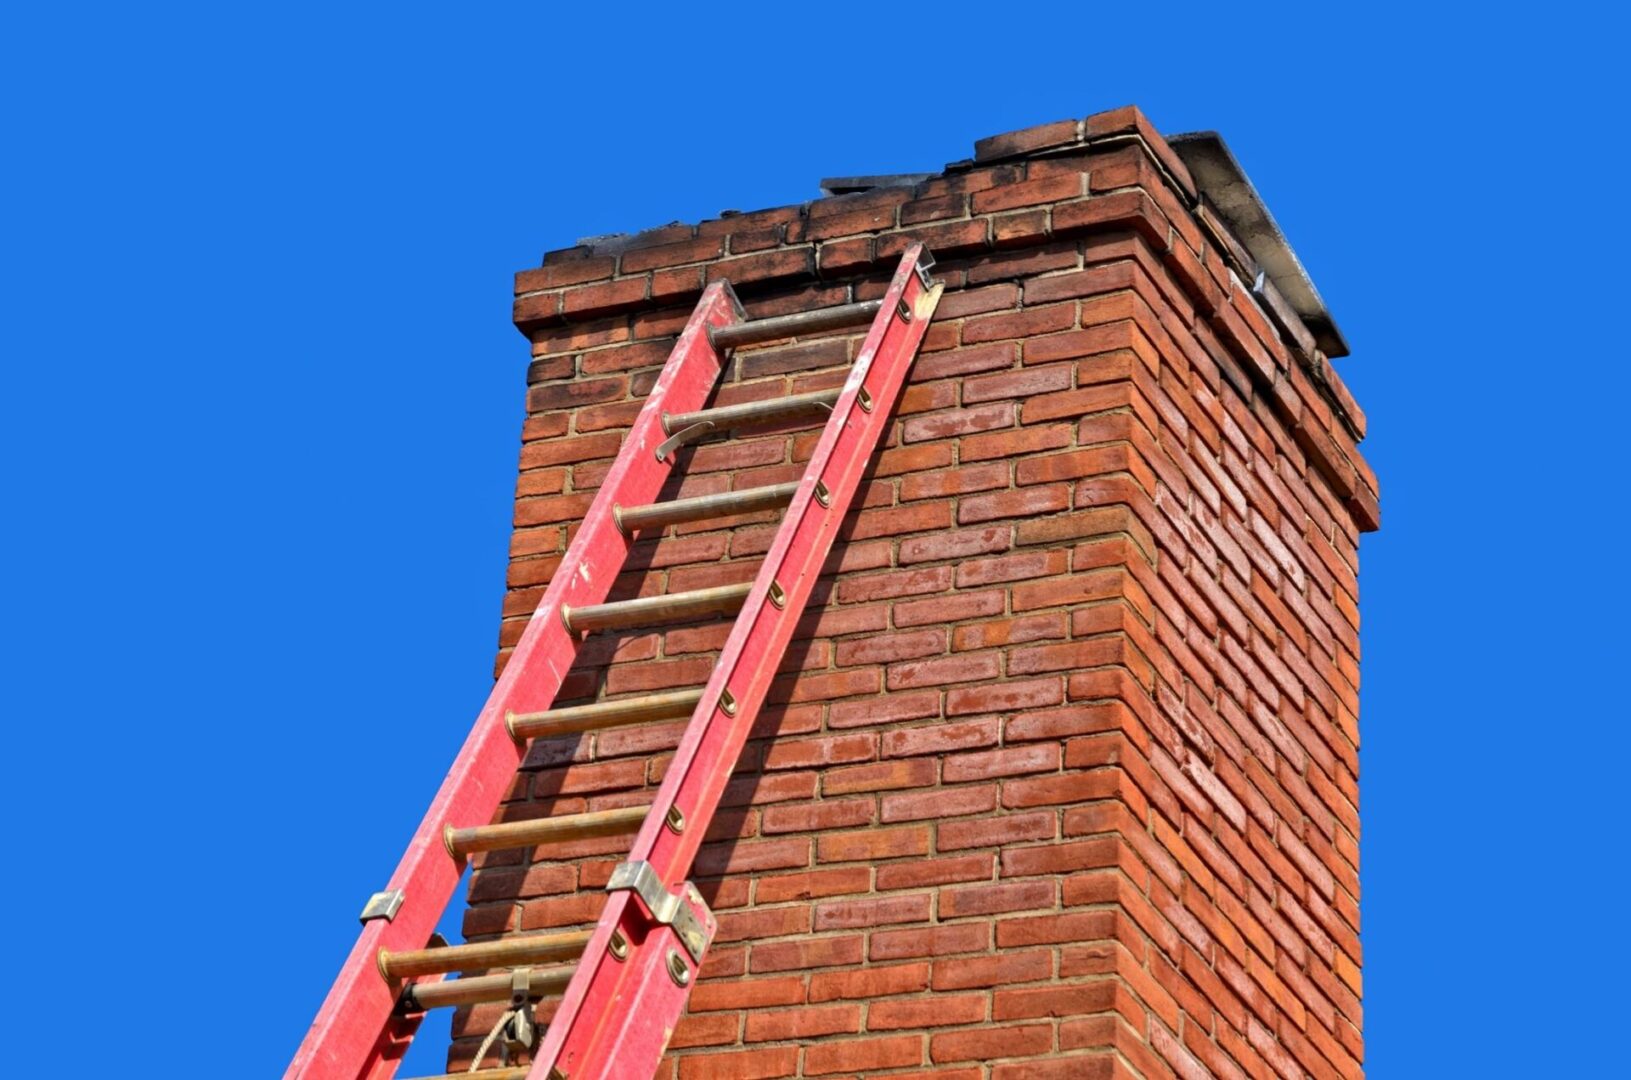 A ladder is on top of the brick chimney.